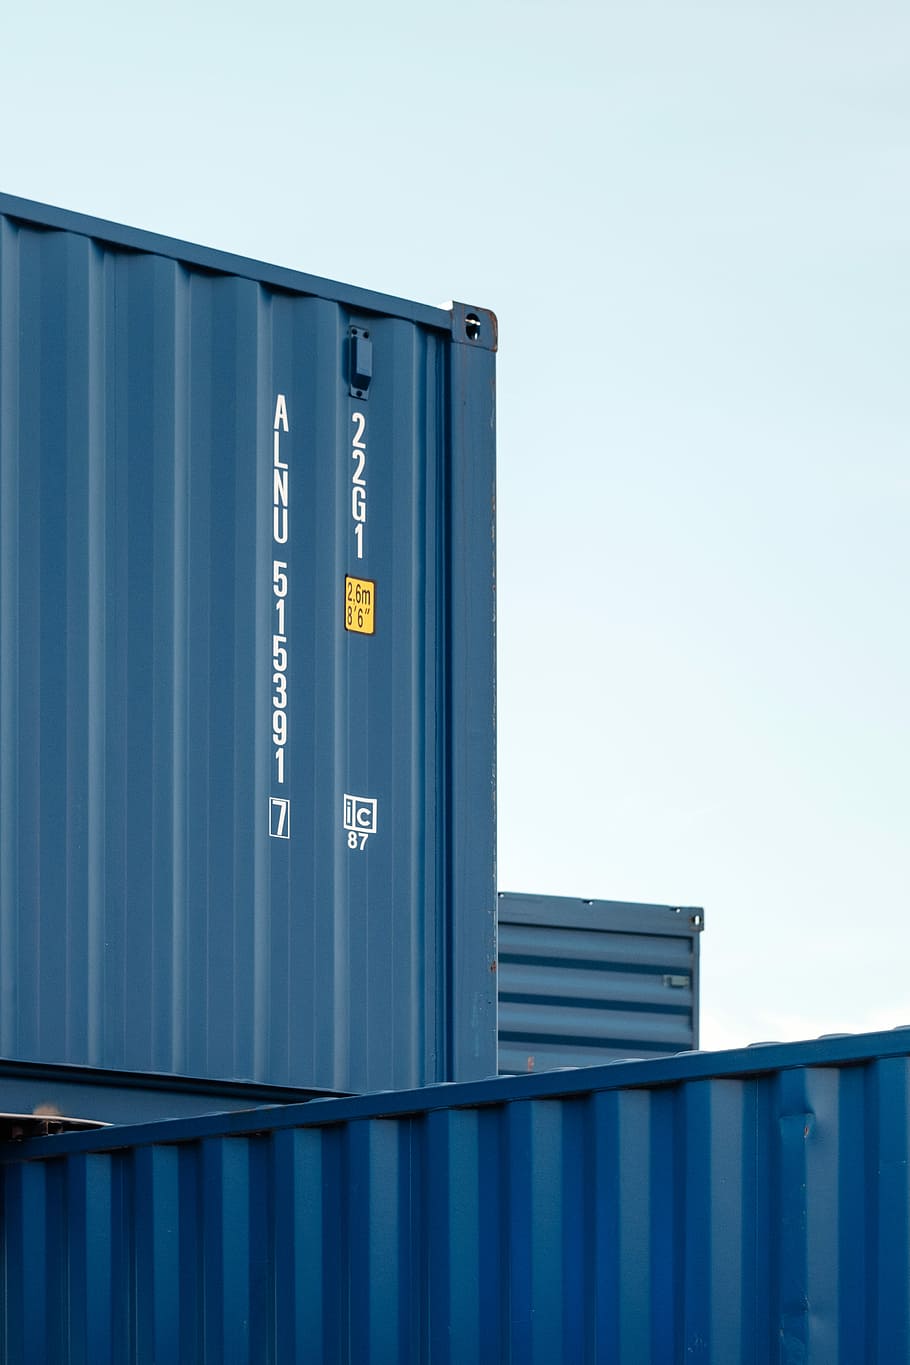 black cargo tanks piled up, gray intermodal containers stacking together under clear blue sky